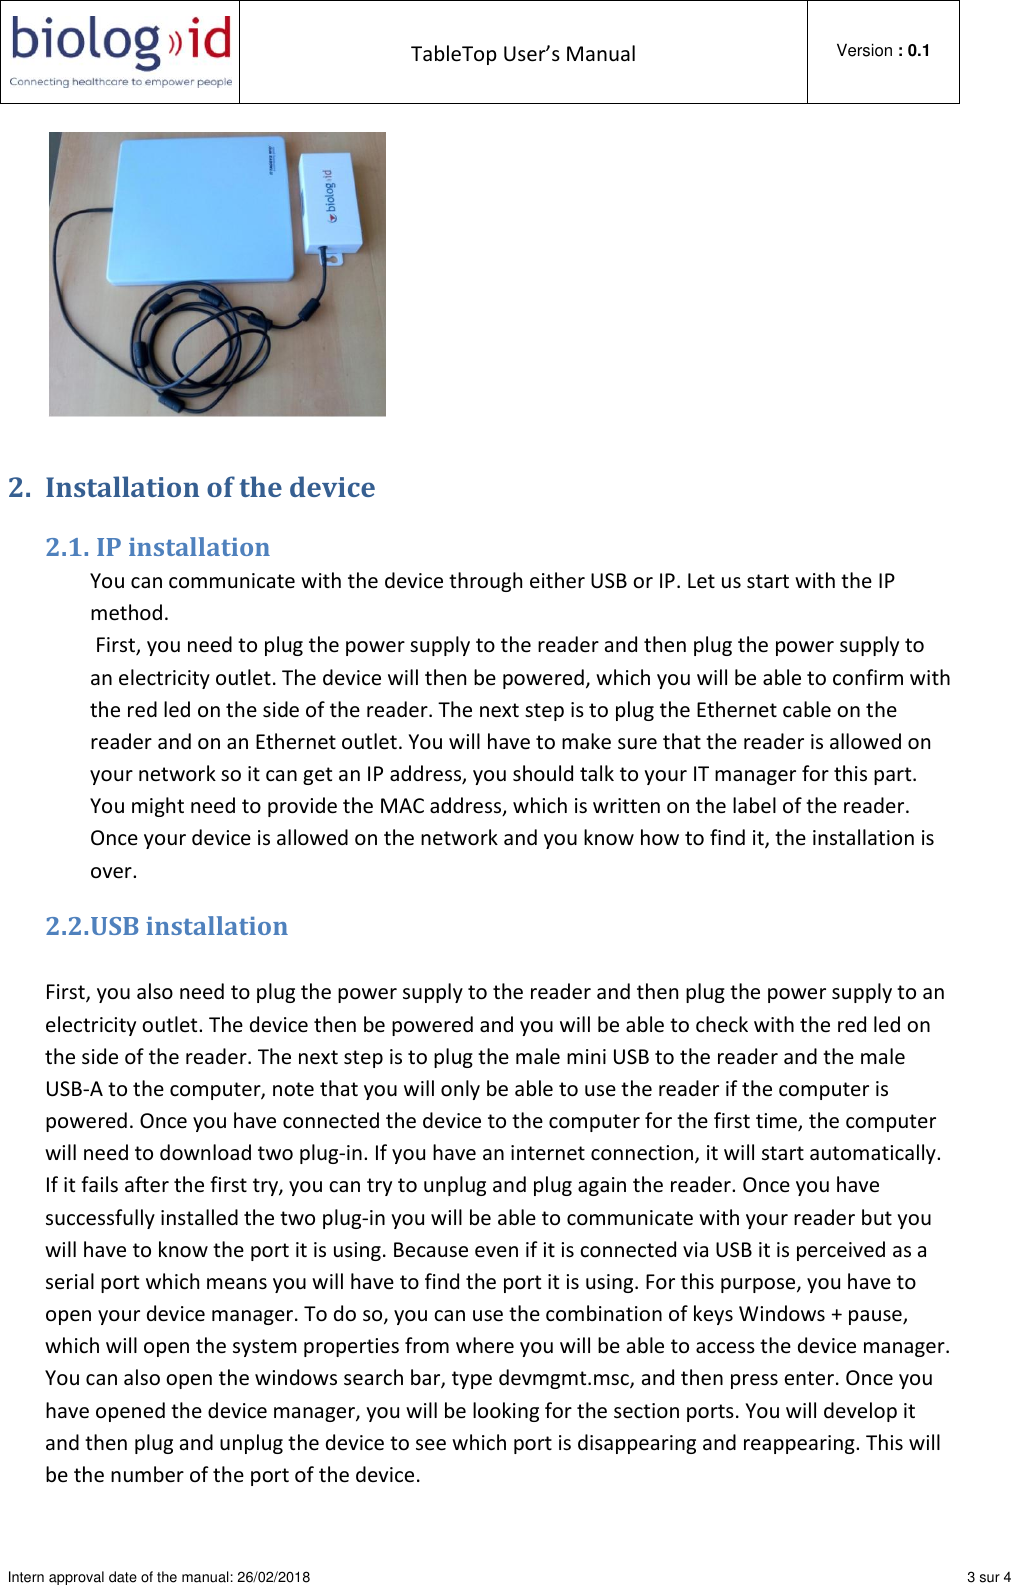  TableTop User’s Manual  Version : 0.1  Intern approval date of the manual: 26/02/2018    3 sur 4   2. Installation of the device 2.1.  IP installation You can communicate with the device through either USB or IP. Let us start with the IP method.    First, you need to plug the power supply to the reader and then plug the power supply to an electricity outlet. The device will then be powered, which you will be able to confirm with the red led on the side of the reader. The next step is to plug the Ethernet cable on the reader and on an Ethernet outlet. You will have to make sure that the reader is allowed on your network so it can get an IP address, you should talk to your IT manager for this part. You might need to provide the MAC address, which is written on the label of the reader. Once your device is allowed on the network and you know how to find it, the installation is over. 2.2. USB installation  First, you also need to plug the power supply to the reader and then plug the power supply to an electricity outlet. The device then be powered and you will be able to check with the red led on the side of the reader. The next step is to plug the male mini USB to the reader and the male USB-A to the computer, note that you will only be able to use the reader if the computer is powered. Once you have connected the device to the computer for the first time, the computer will need to download two plug-in. If you have an internet connection, it will start automatically. If it fails after the first try, you can try to unplug and plug again the reader. Once you have successfully installed the two plug-in you will be able to communicate with your reader but you will have to know the port it is using. Because even if it is connected via USB it is perceived as a serial port which means you will have to find the port it is using. For this purpose, you have to open your device manager. To do so, you can use the combination of keys Windows + pause, which will open the system properties from where you will be able to access the device manager. You can also open the windows search bar, type devmgmt.msc, and then press enter. Once you have opened the device manager, you will be looking for the section ports. You will develop it and then plug and unplug the device to see which port is disappearing and reappearing. This will be the number of the port of the device. 